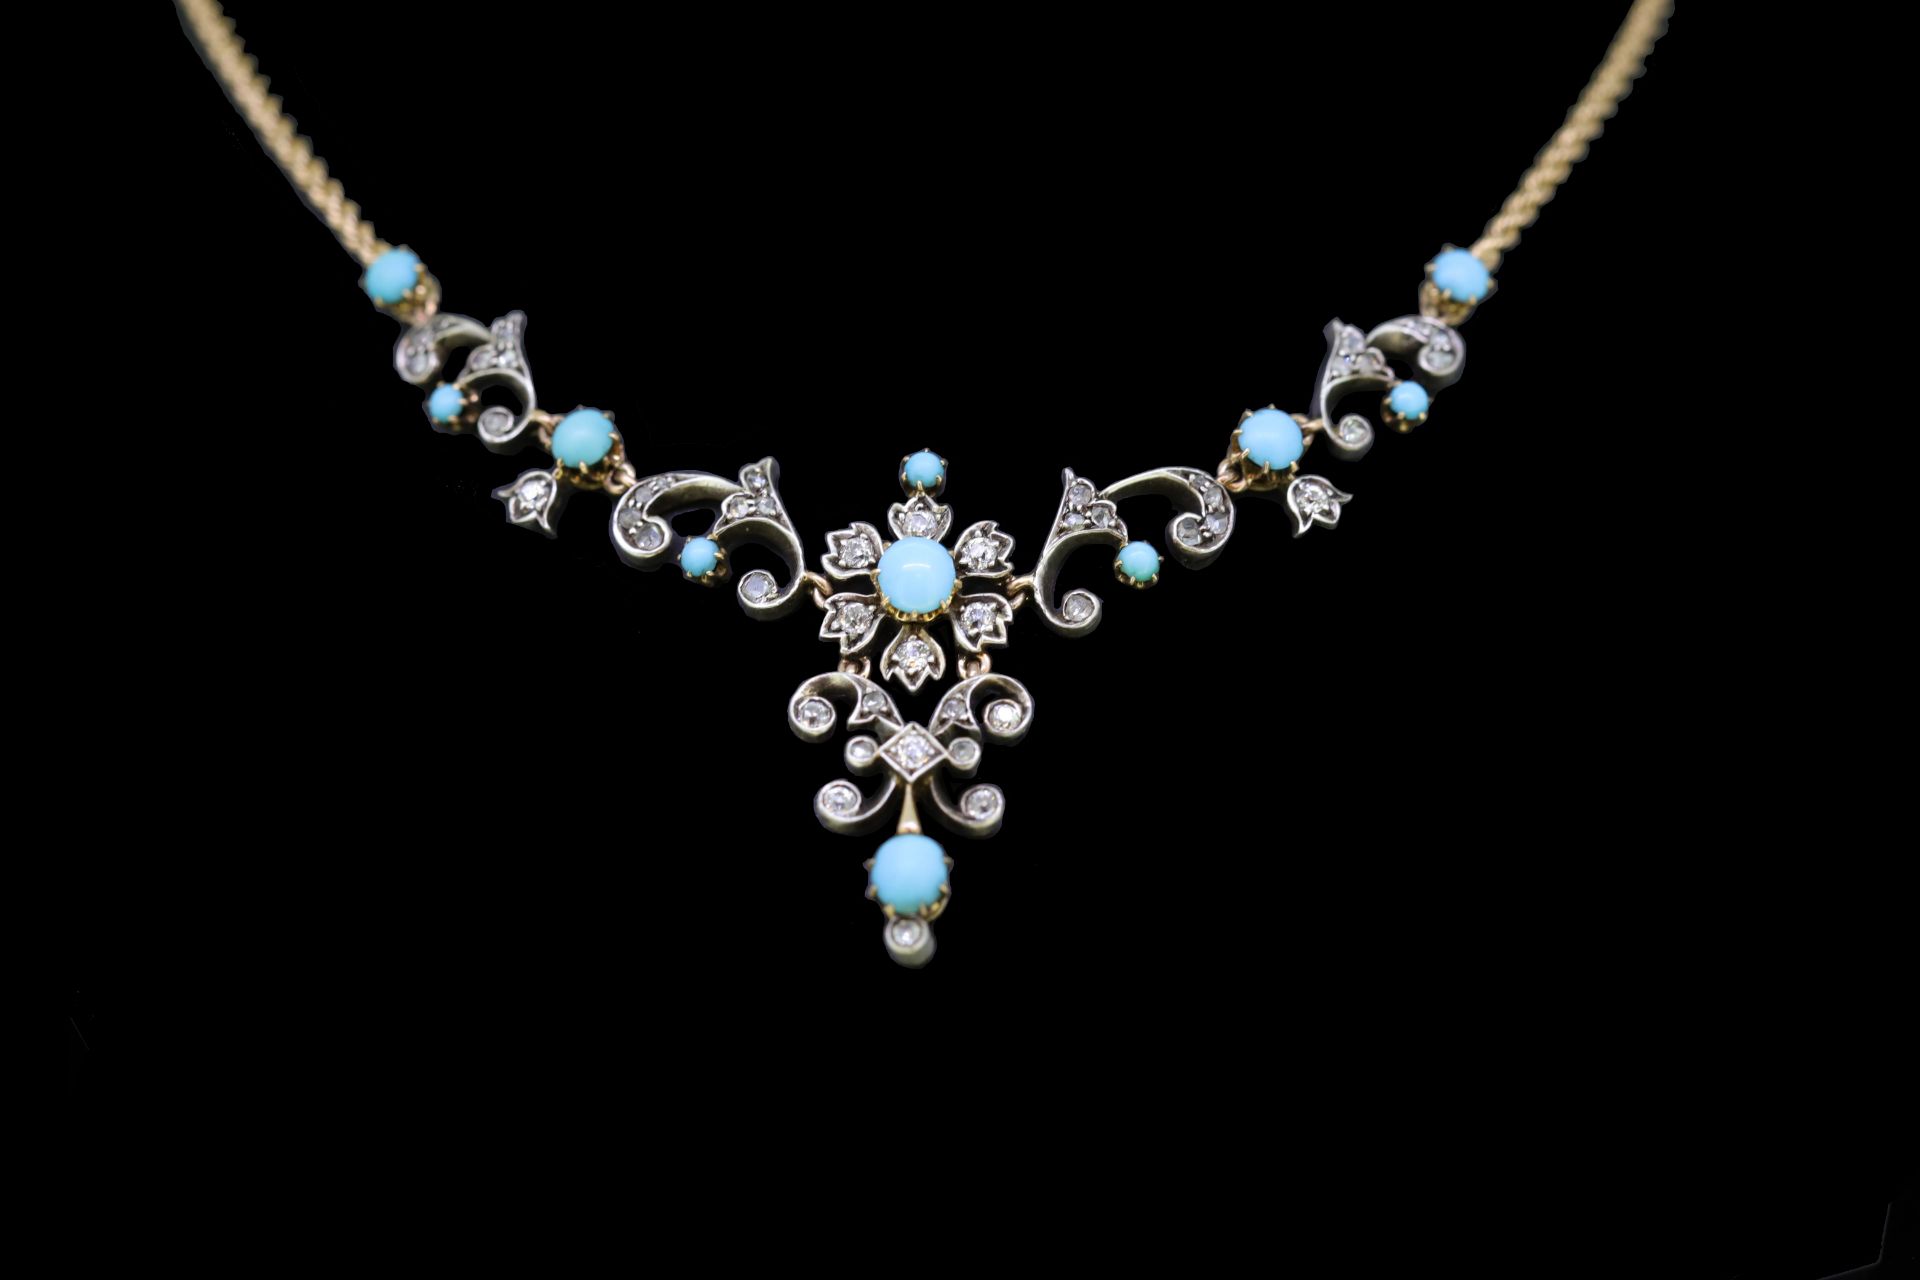 ANTIQUE TURQUOISE AND DIAMOND NECKLACE